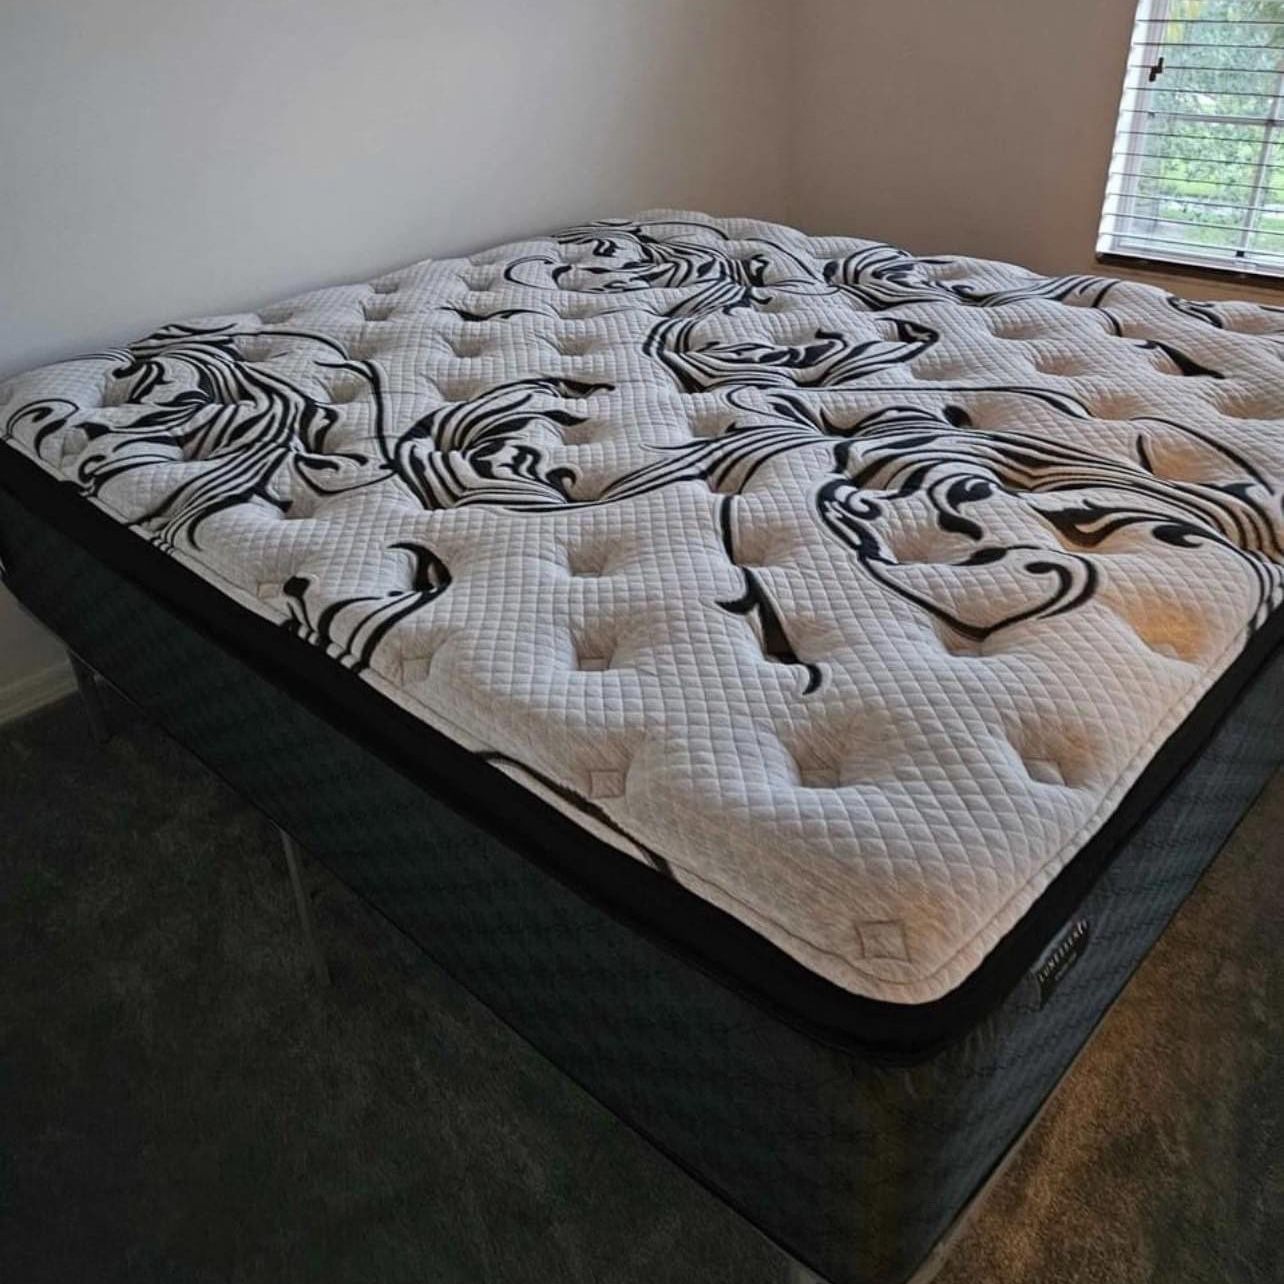 Hybrid Mattress Cooper Cooling Top King Queen Only $40 Down